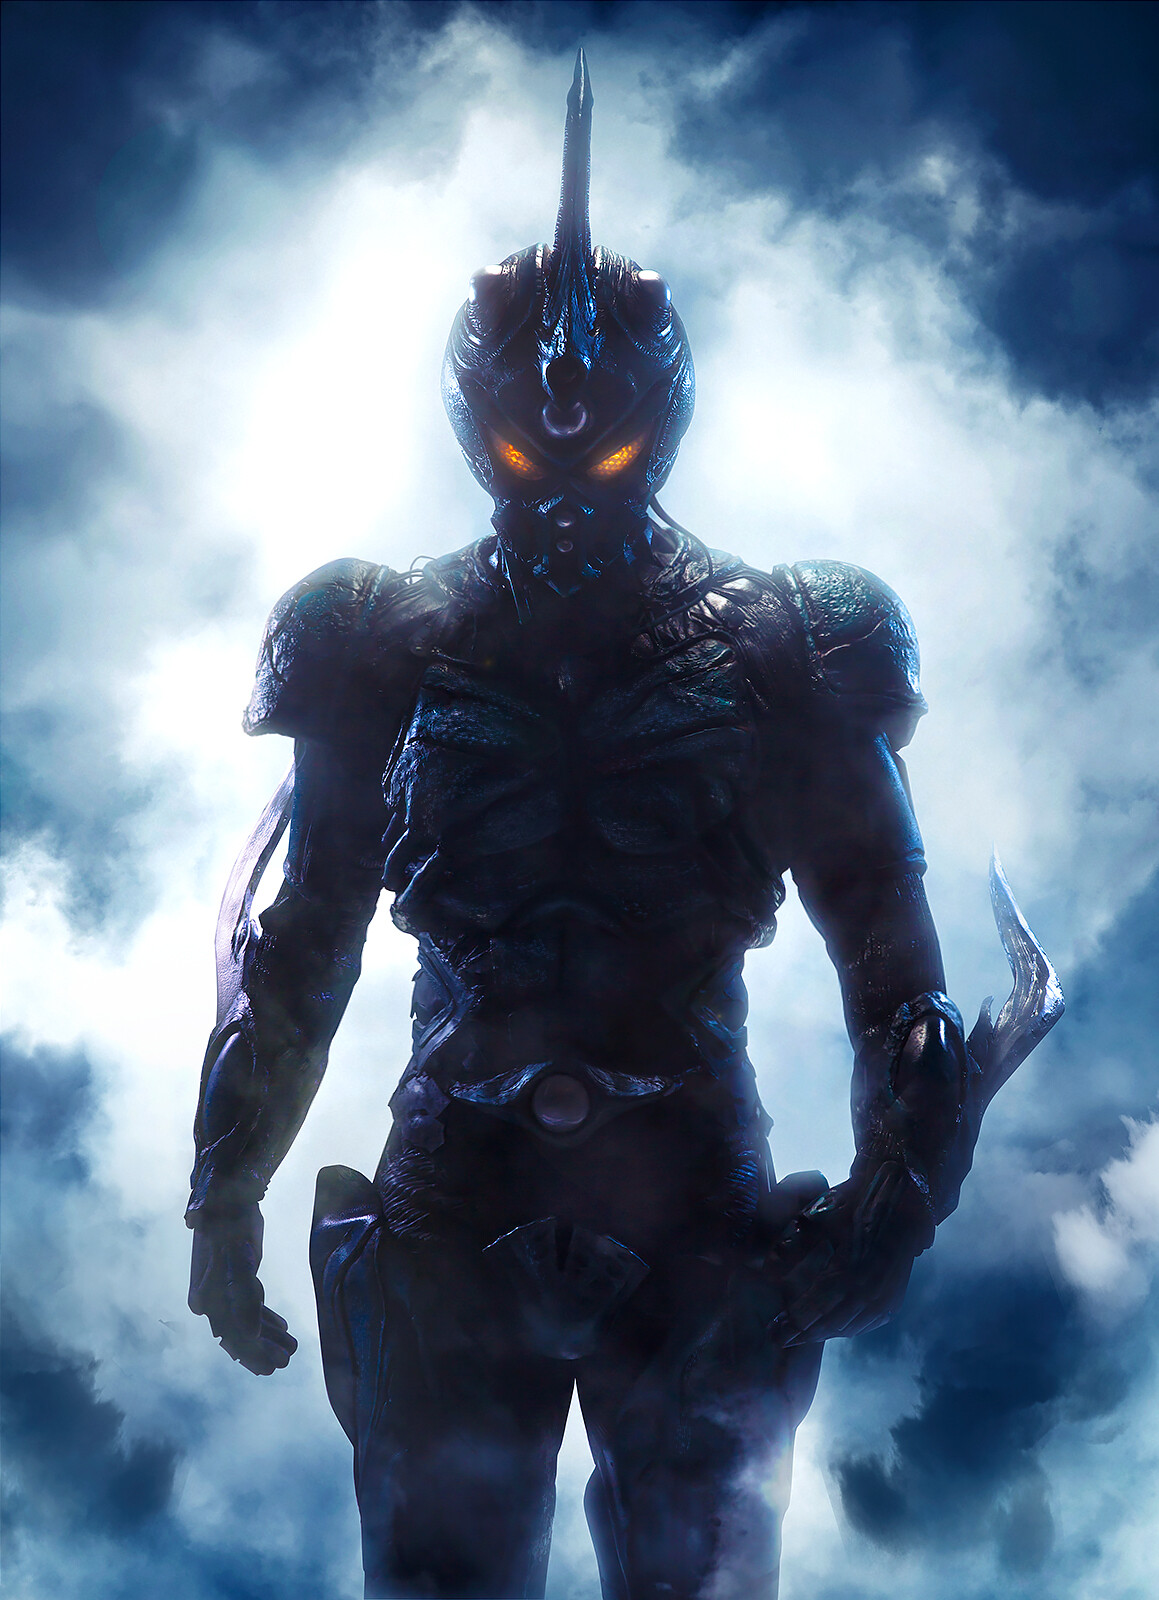 GUYVER: THE BIOBOOSTED Armor - Procreation of the Wicked Vol. 2 - R4 (DVD)  Anime $10.00 - PicClick AU